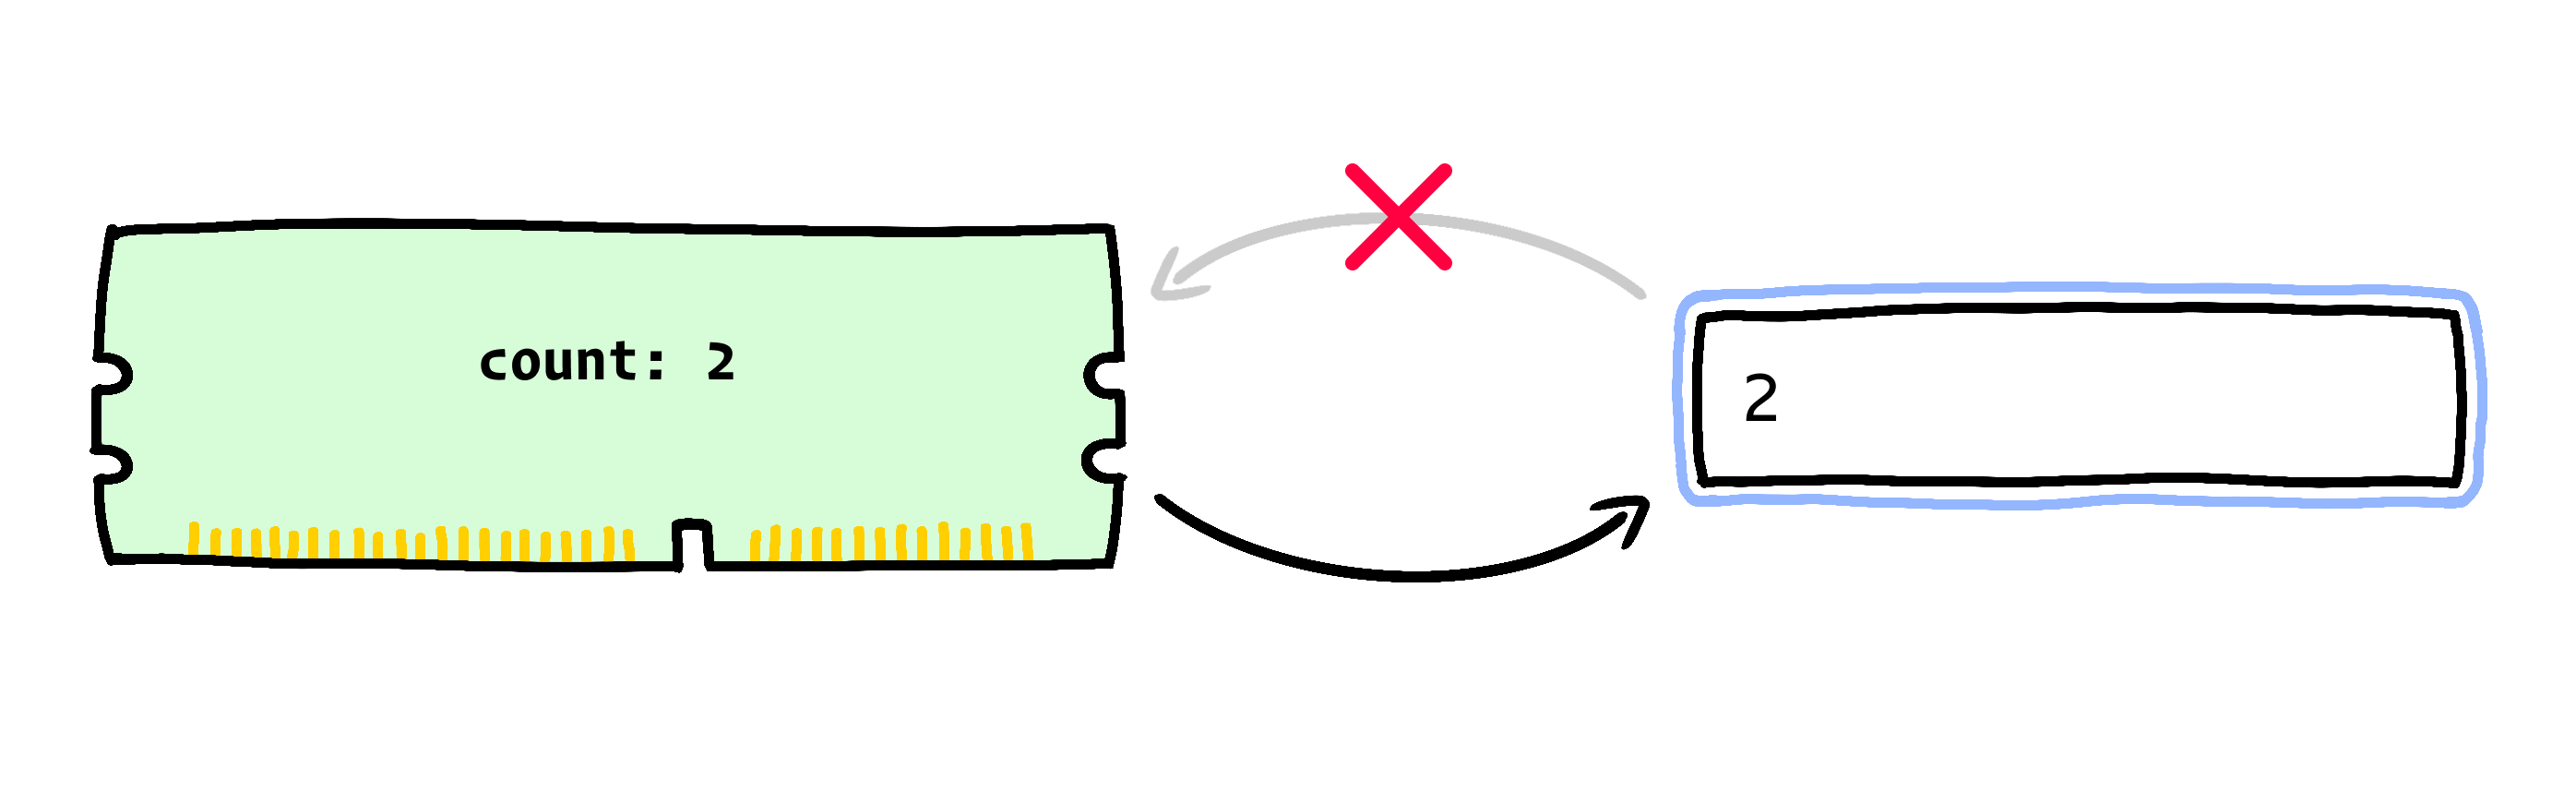 Same hand-drawn sketch, but updated so that the variable being tracked is “count”. An arrow connects the memory stick to the input, but the arrow connecting the input to the memory stick has been crossed out: editing the input does NOT update the state